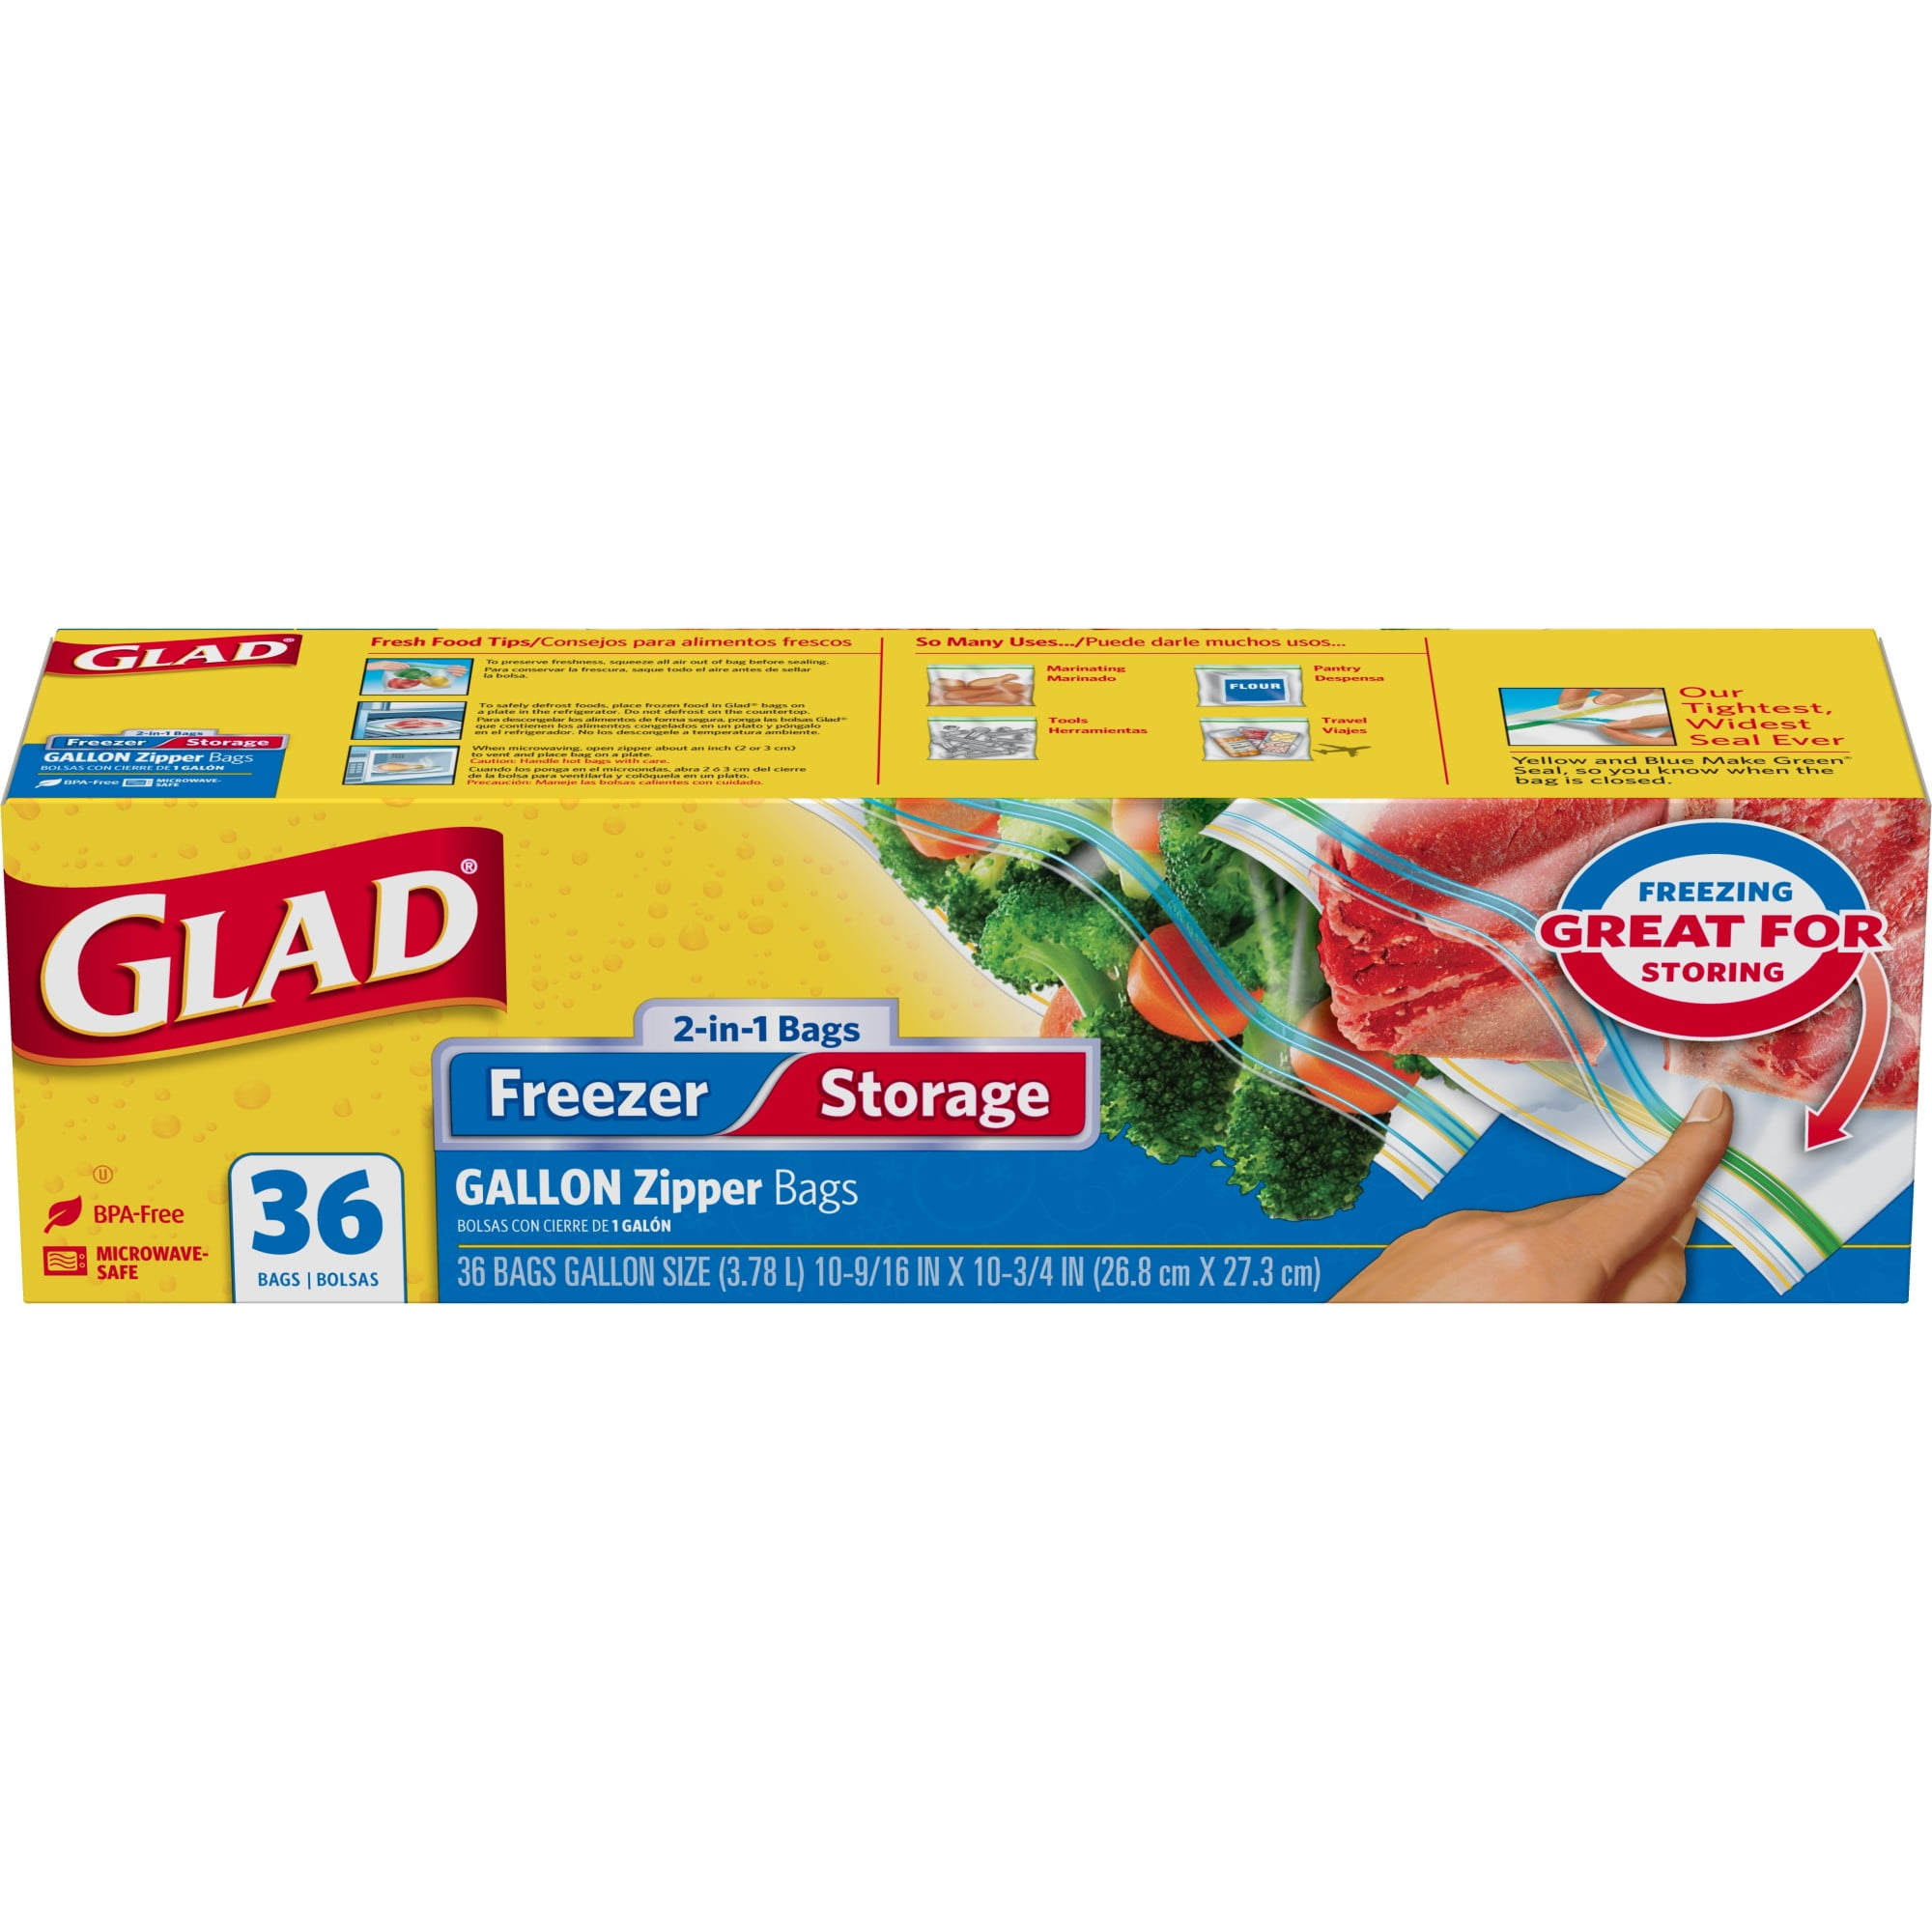 Glad zipper bags QUART size bags 4 pack/box total 264 bags new & sealed extra 